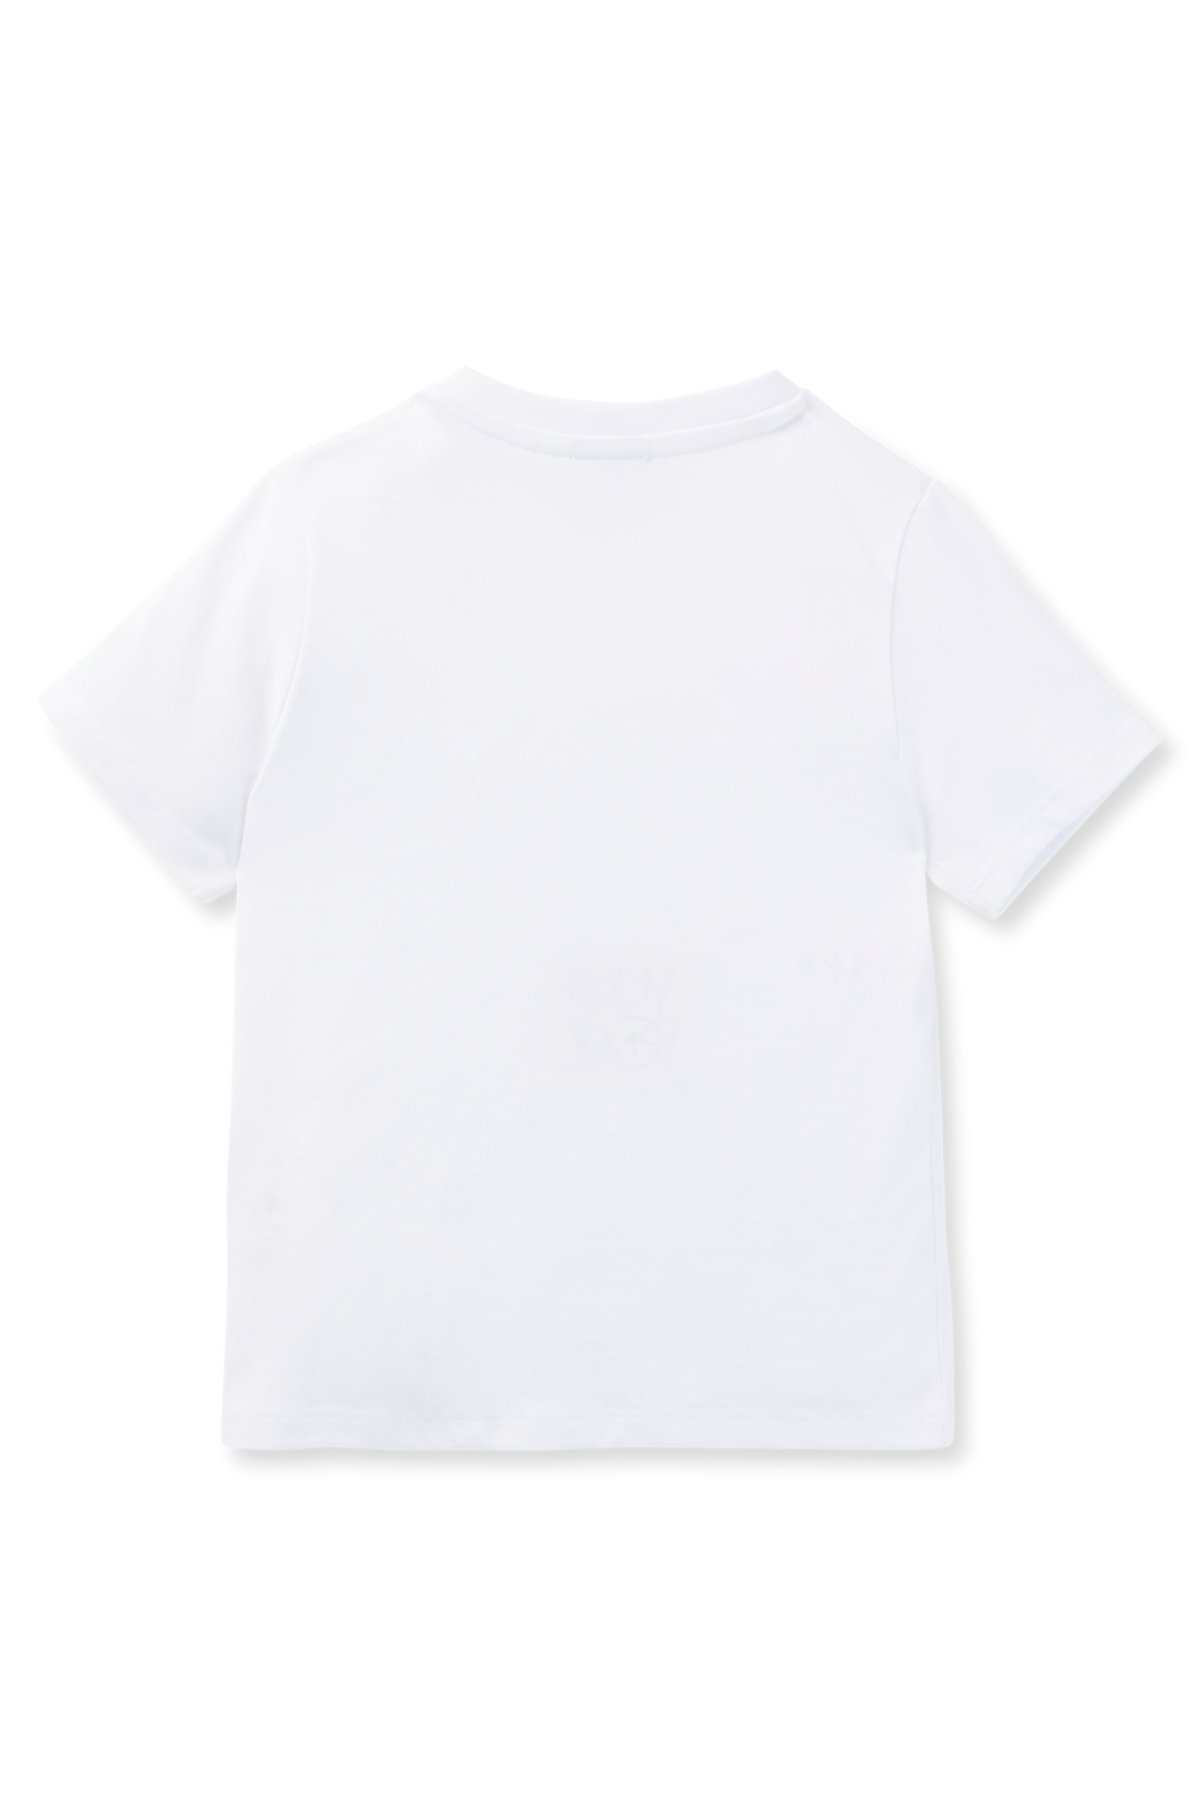 Kids' T-shirt in cotton with logo print, White